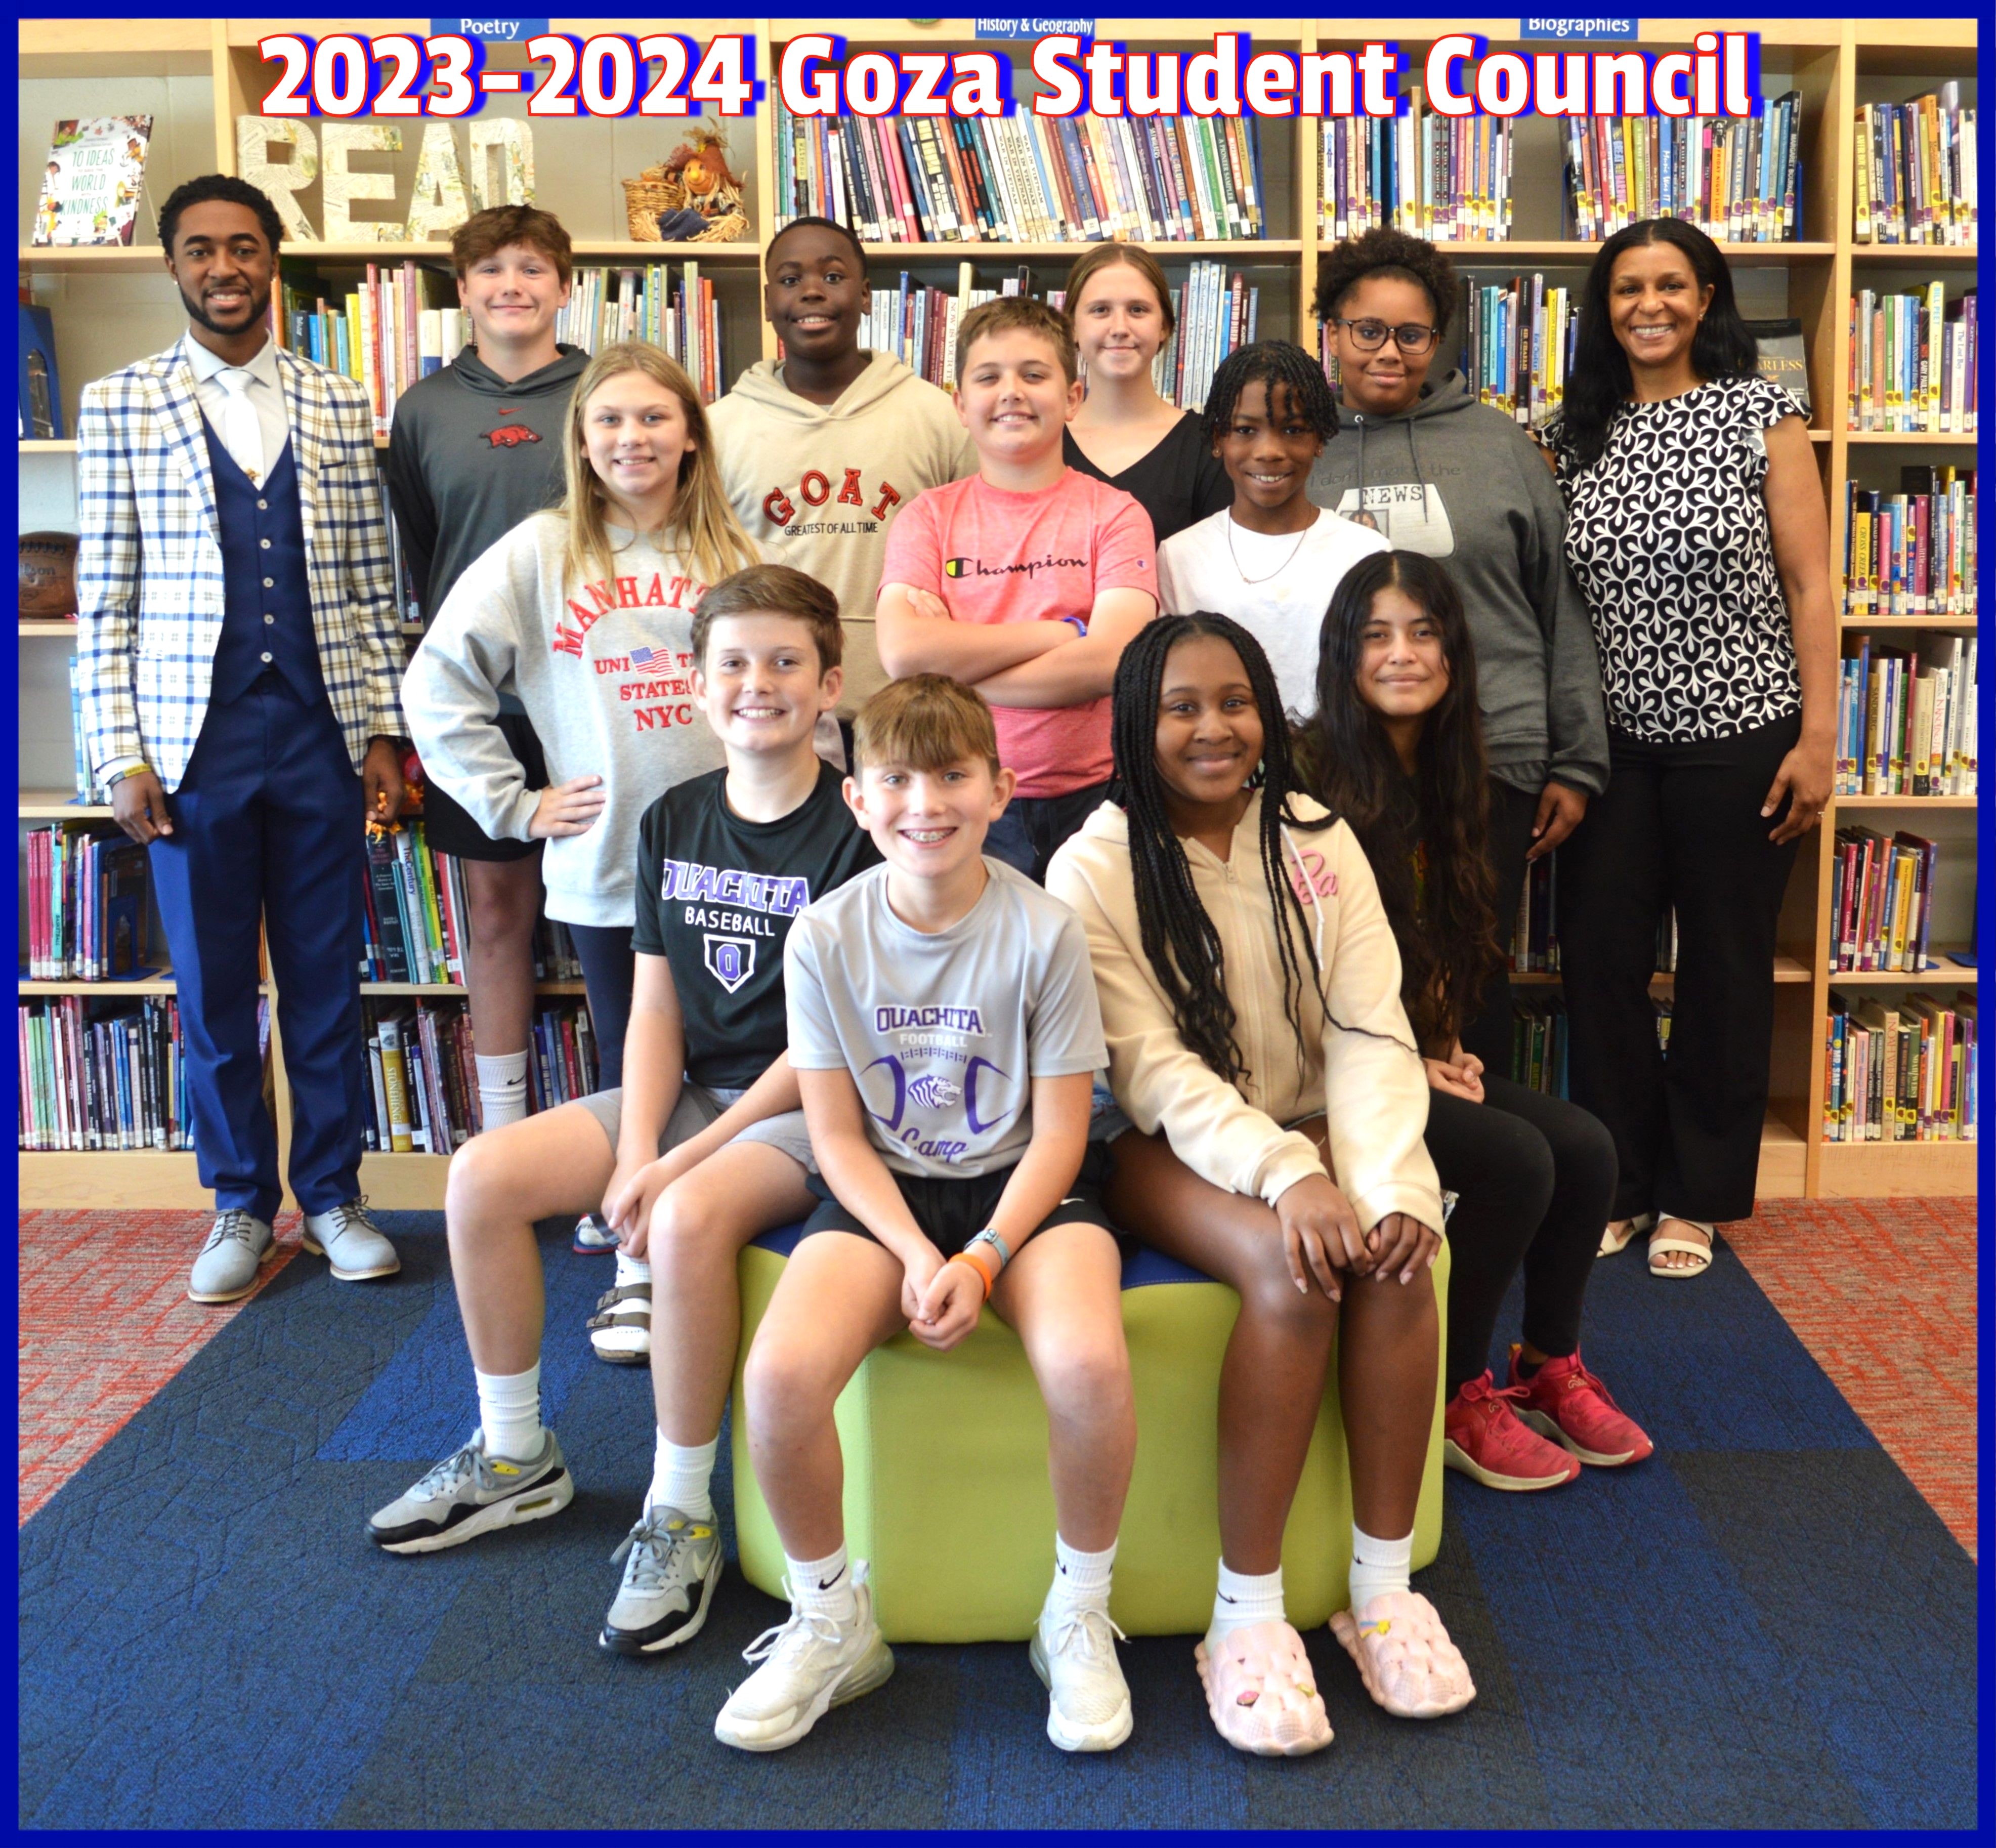 Student Council Group